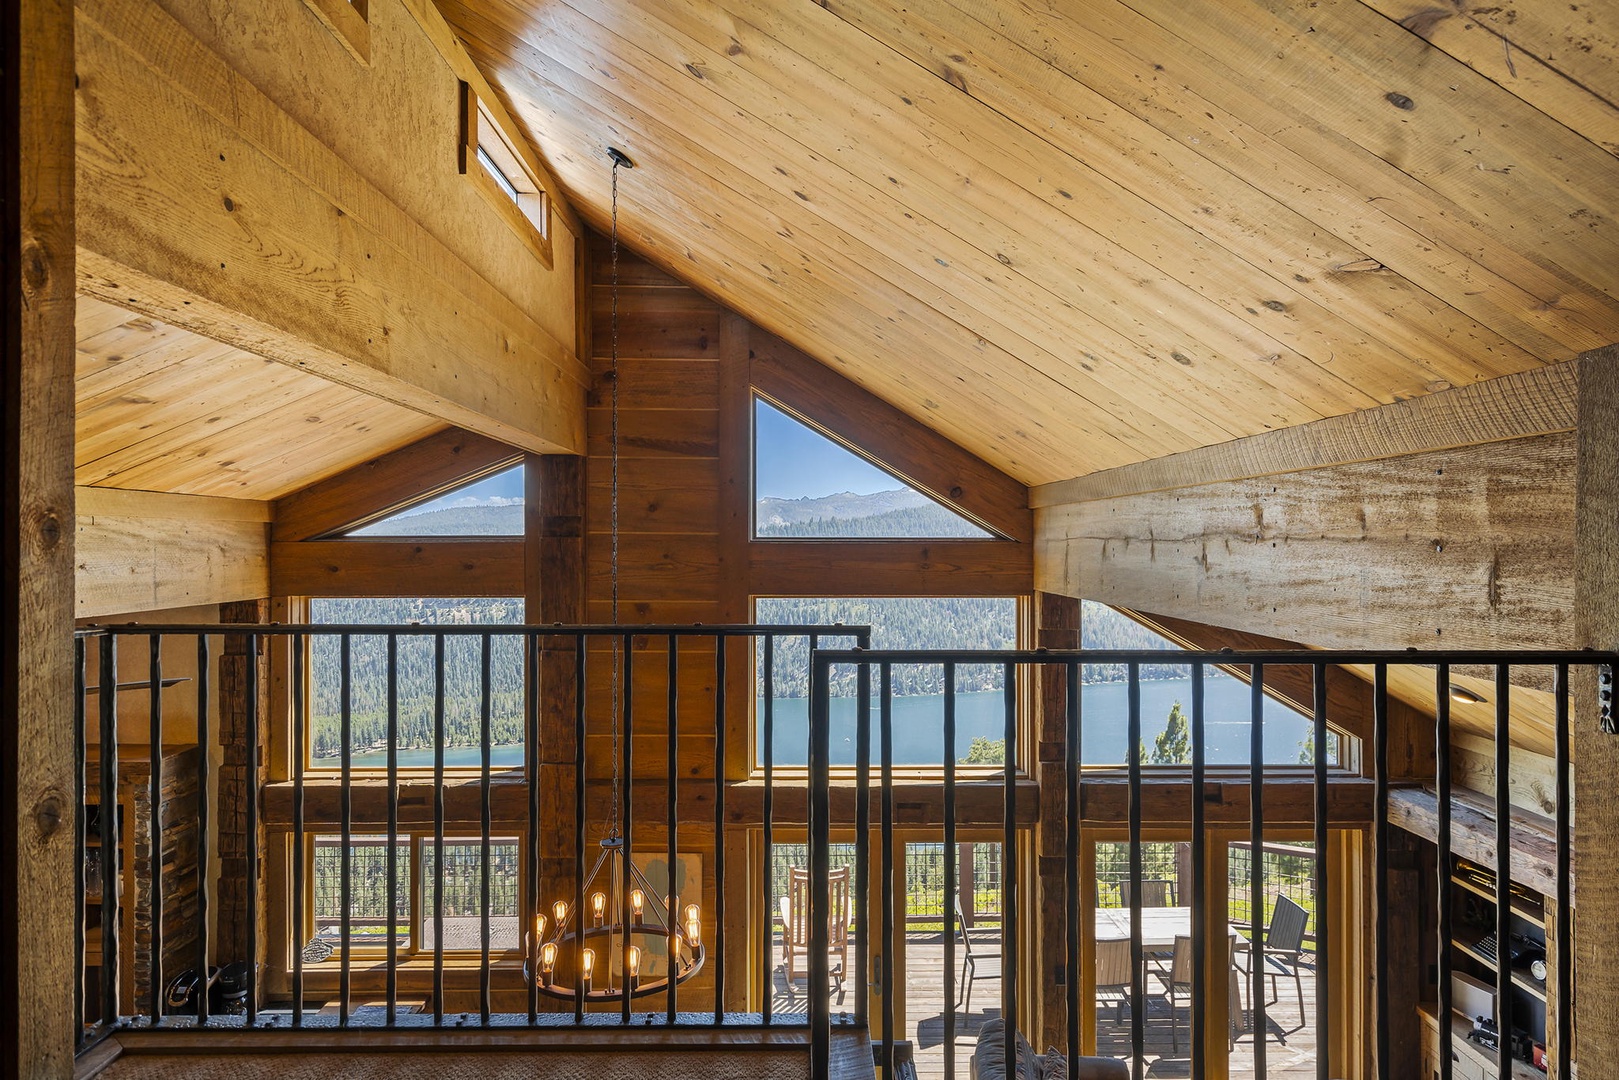 Upstairs loft area: Lakeview Mountaintop Chateau